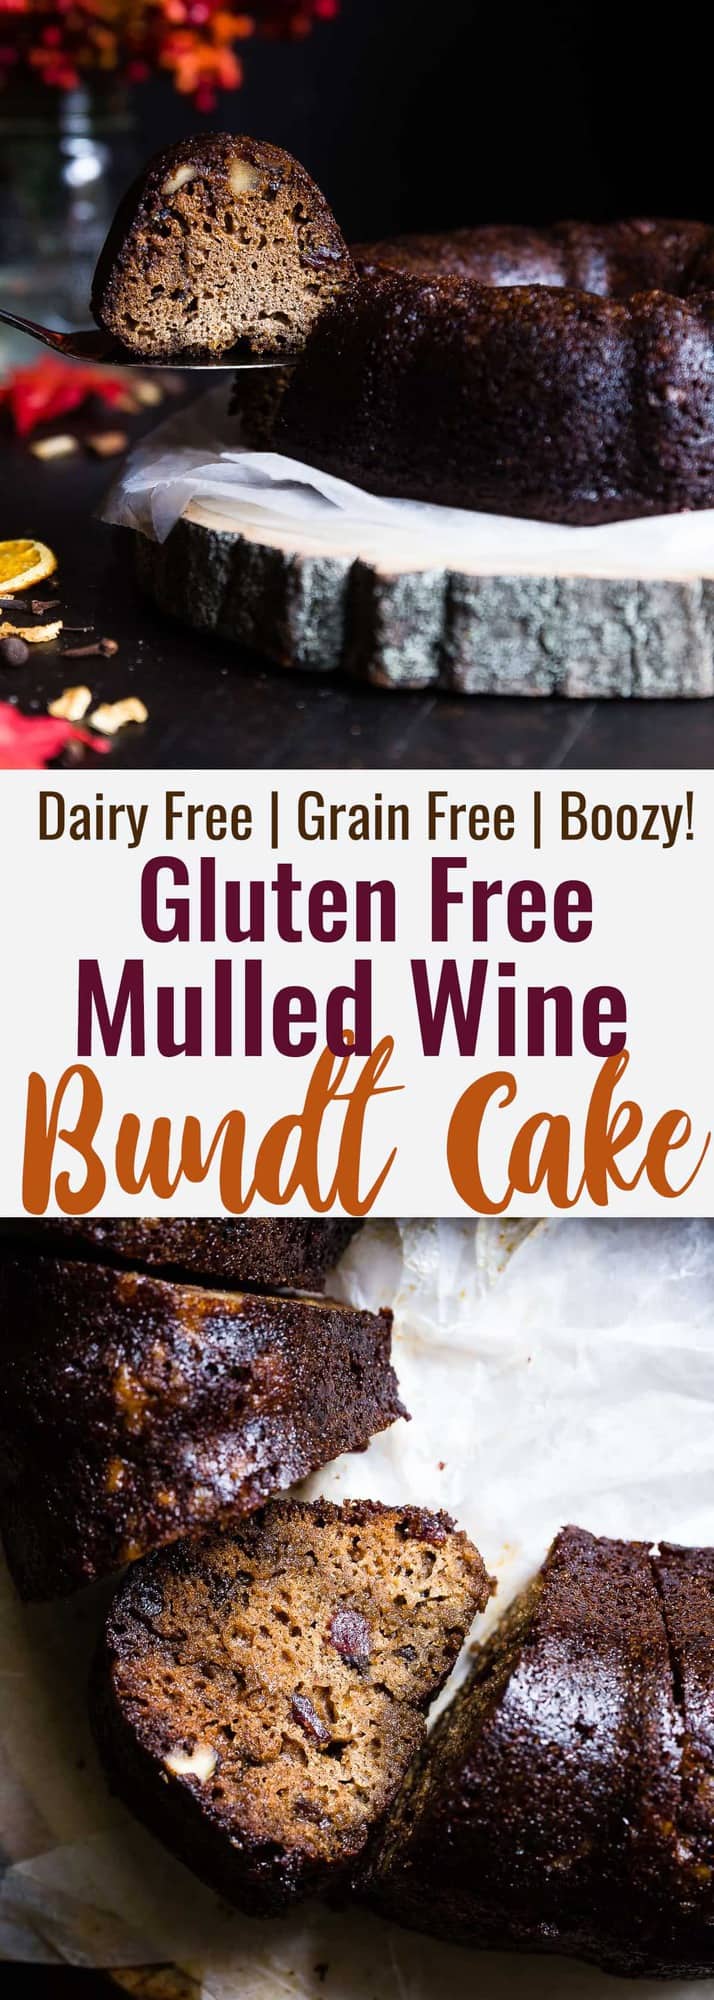 Gluten Free Mulled Wine cake - This better for you red wine cake has all the spicy, cozy flavors of the classic holiday drink! It's gluten/grain/dairy free and BOOZY! What more could you want? | #Foodfaithfitness | #Glutenfree #Grainfree #Dairyfree #Mulledwine #Cake